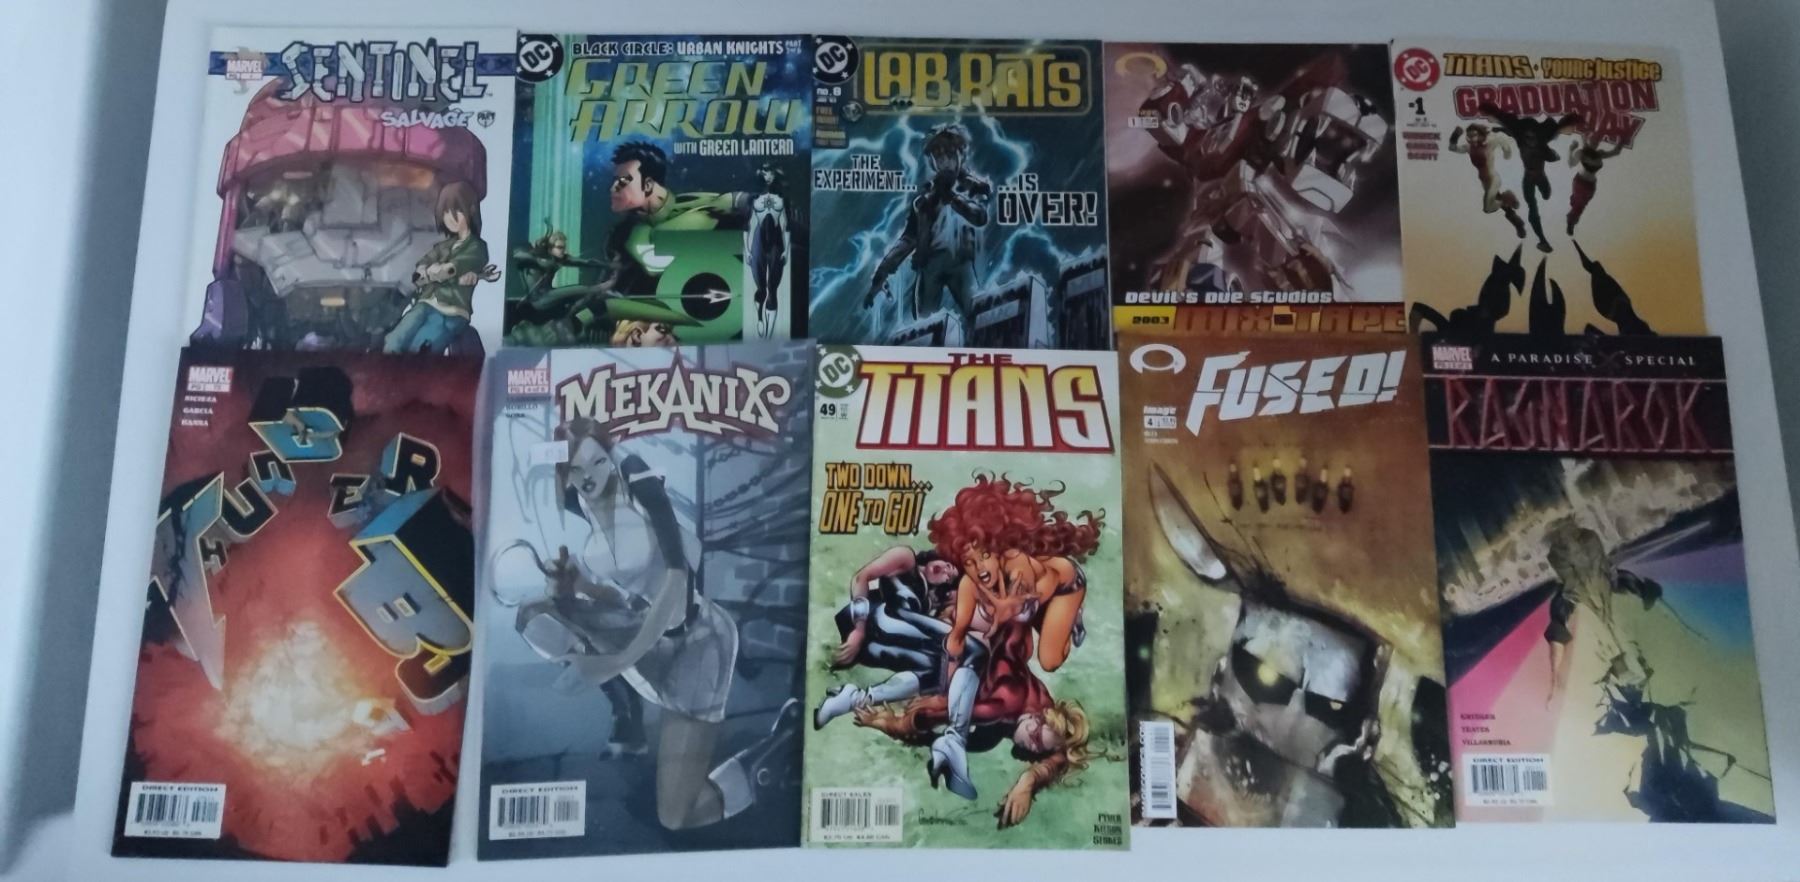 A collection of DC and Marvel comics.